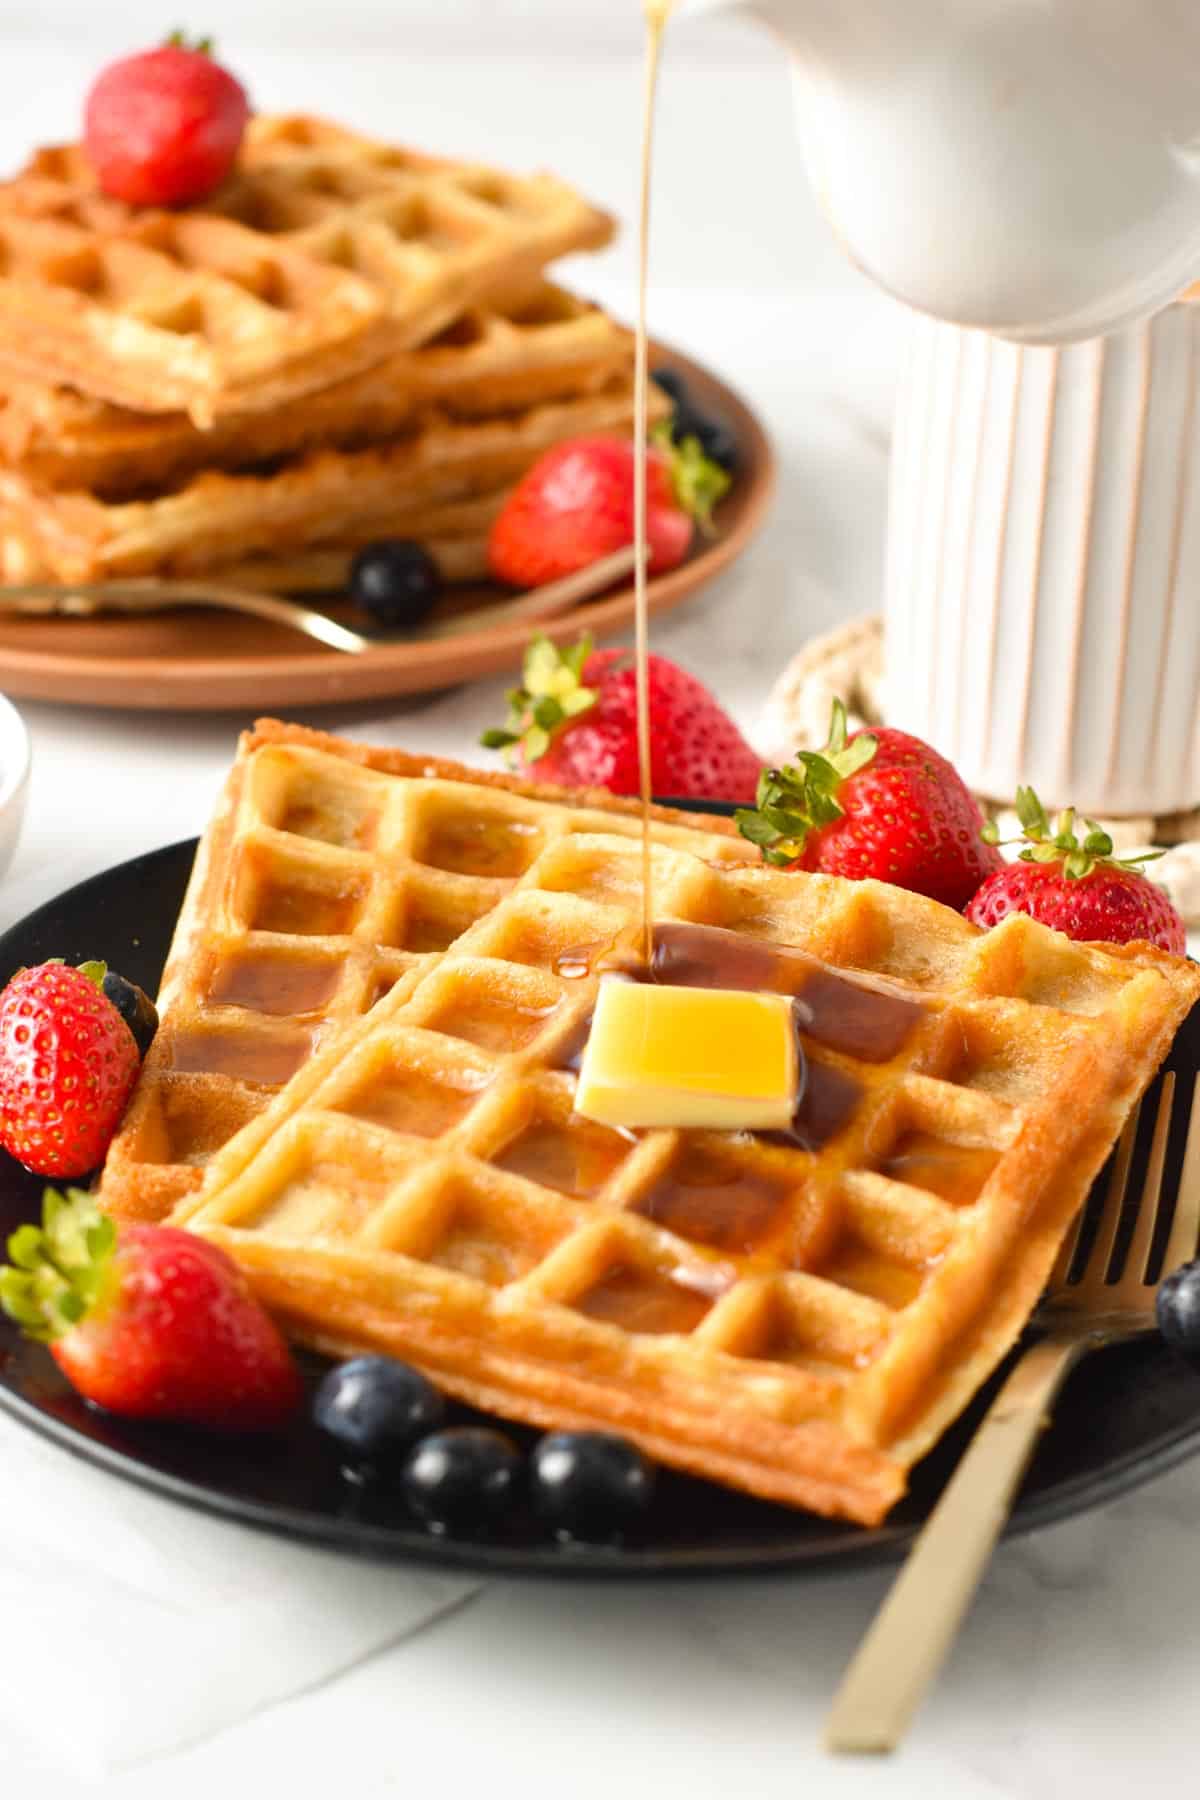 These Homemade Gluten-free waffles are light and crispy Brussels waffles with the most delicious vanilla flavors. Plus, if you are after an easy-to-make gluten-free breakfast that impresses you, these gluten-free waffles are ready in less than 20 minutes.